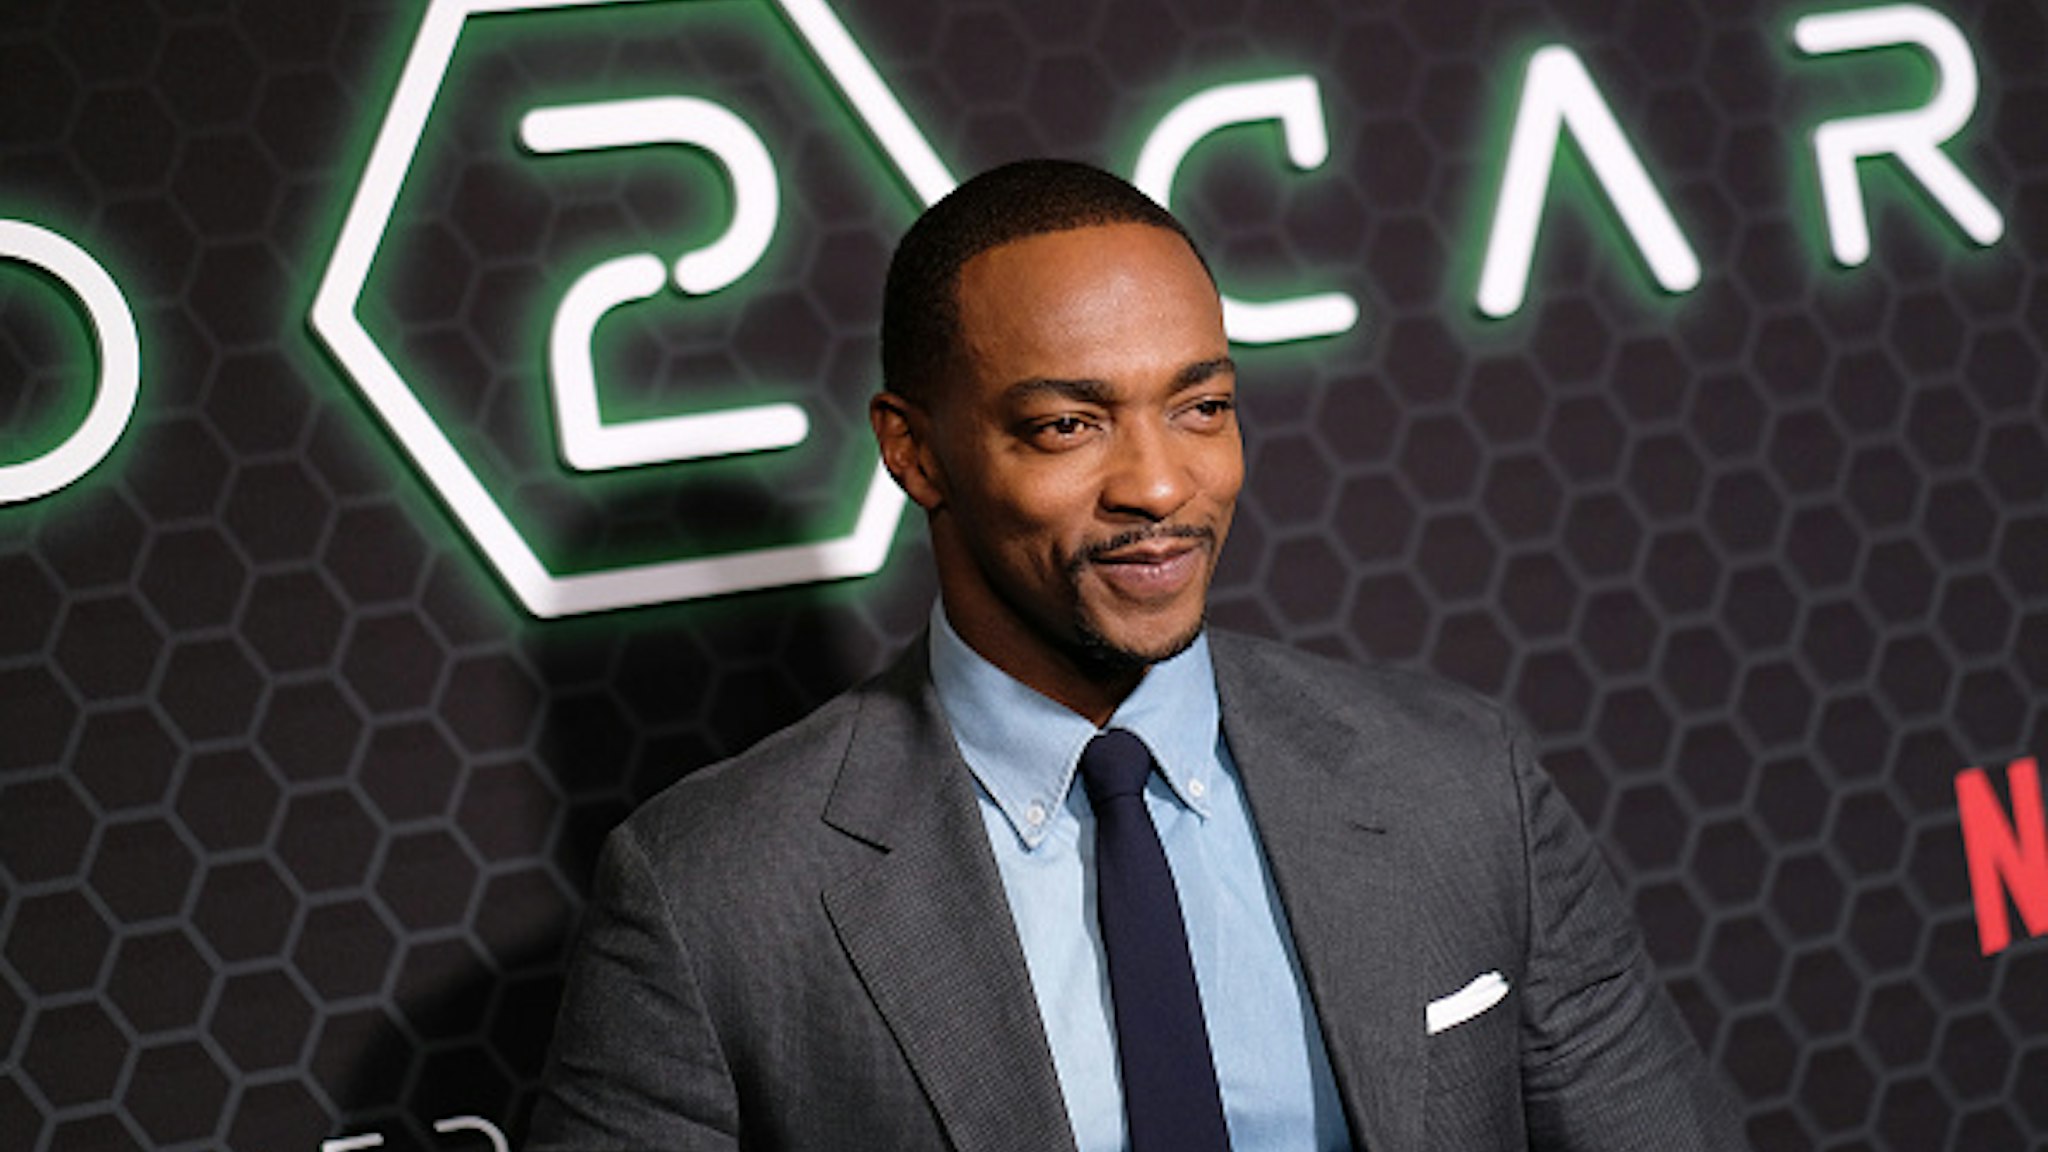 NEW YORK, NEW YORK - FEBRUARY 24: Anthony Mackie attends Netflix's "Altered Carbon" Season 2 Photo Call at AMC Lincoln Square Theater on February 24, 2020 in New York City.